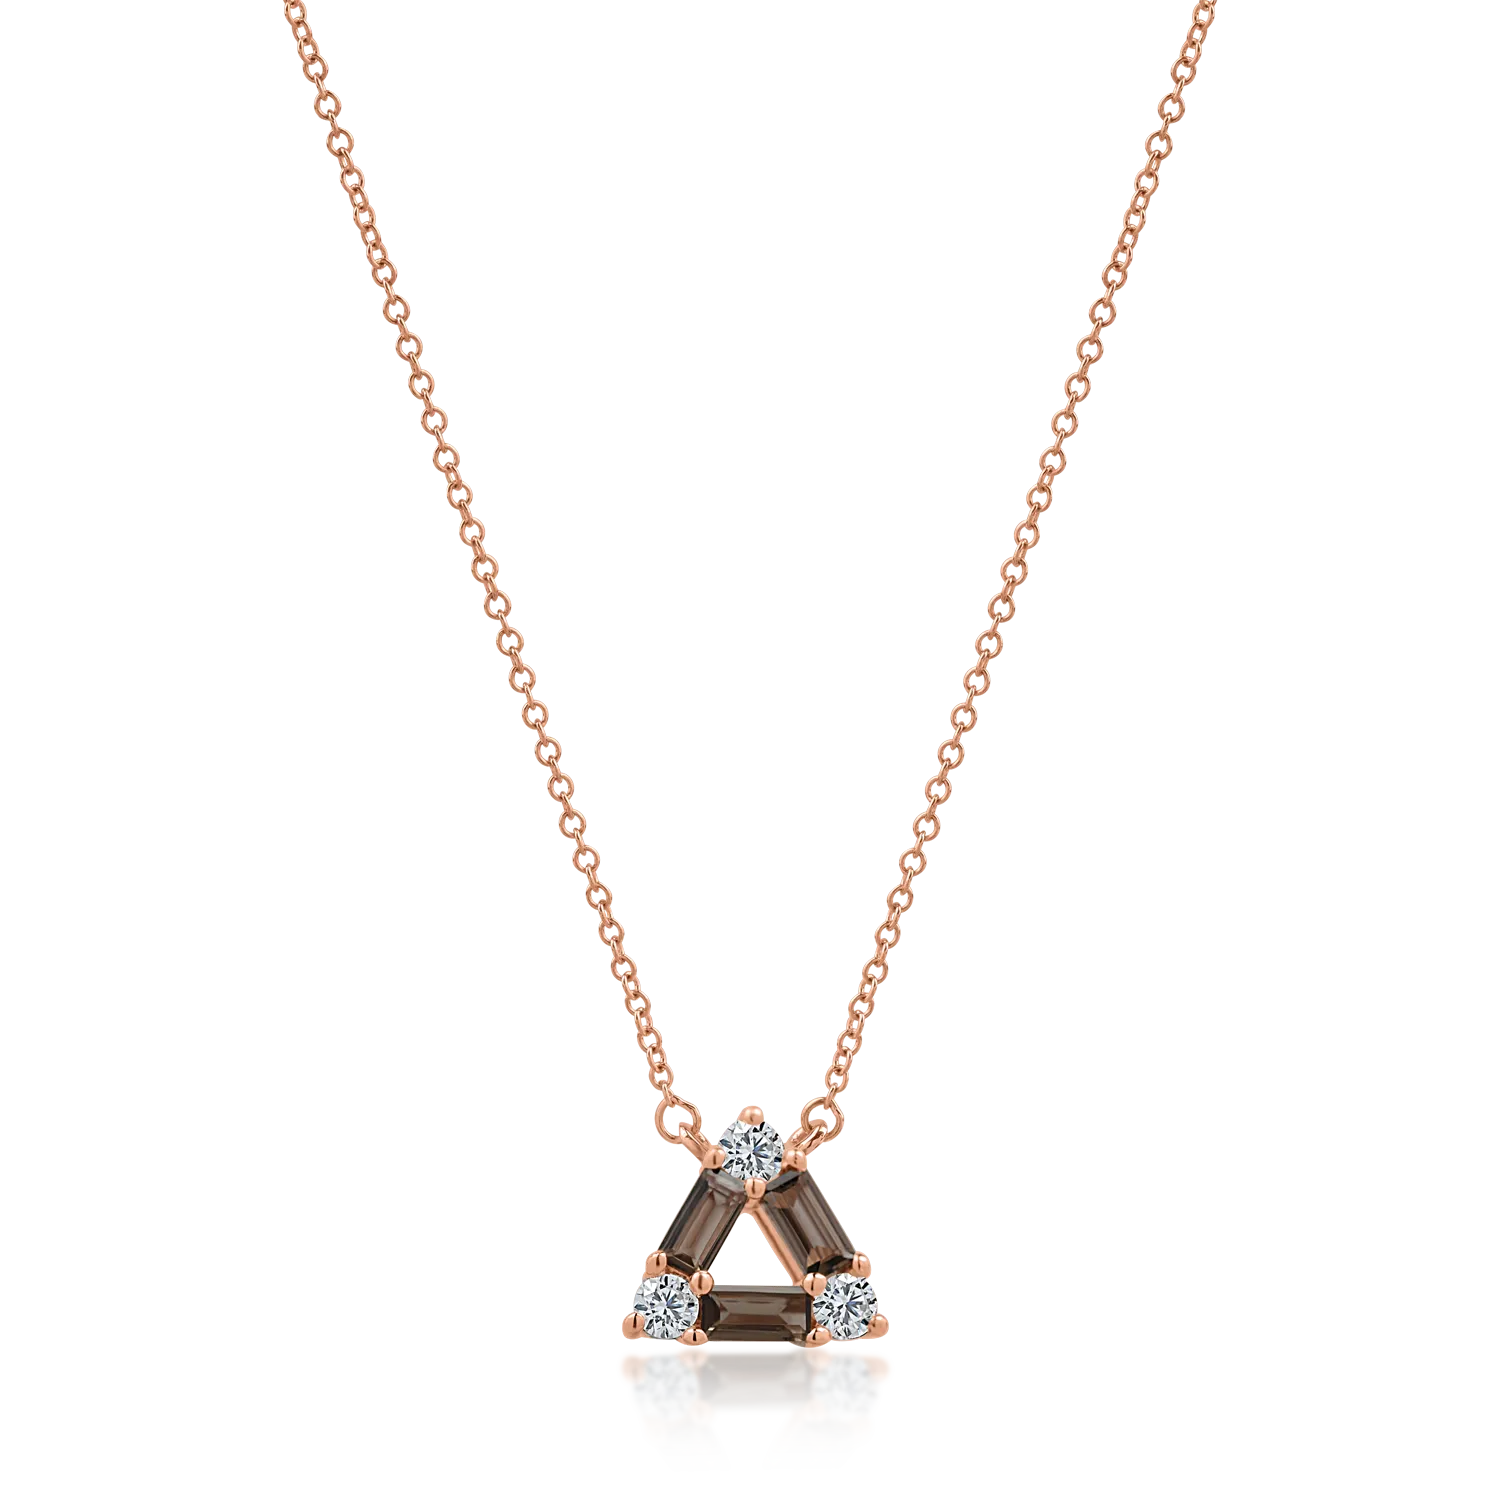 Rose gold pendant necklace with 0.29ct smoky quartz and 0.157ct diamonds